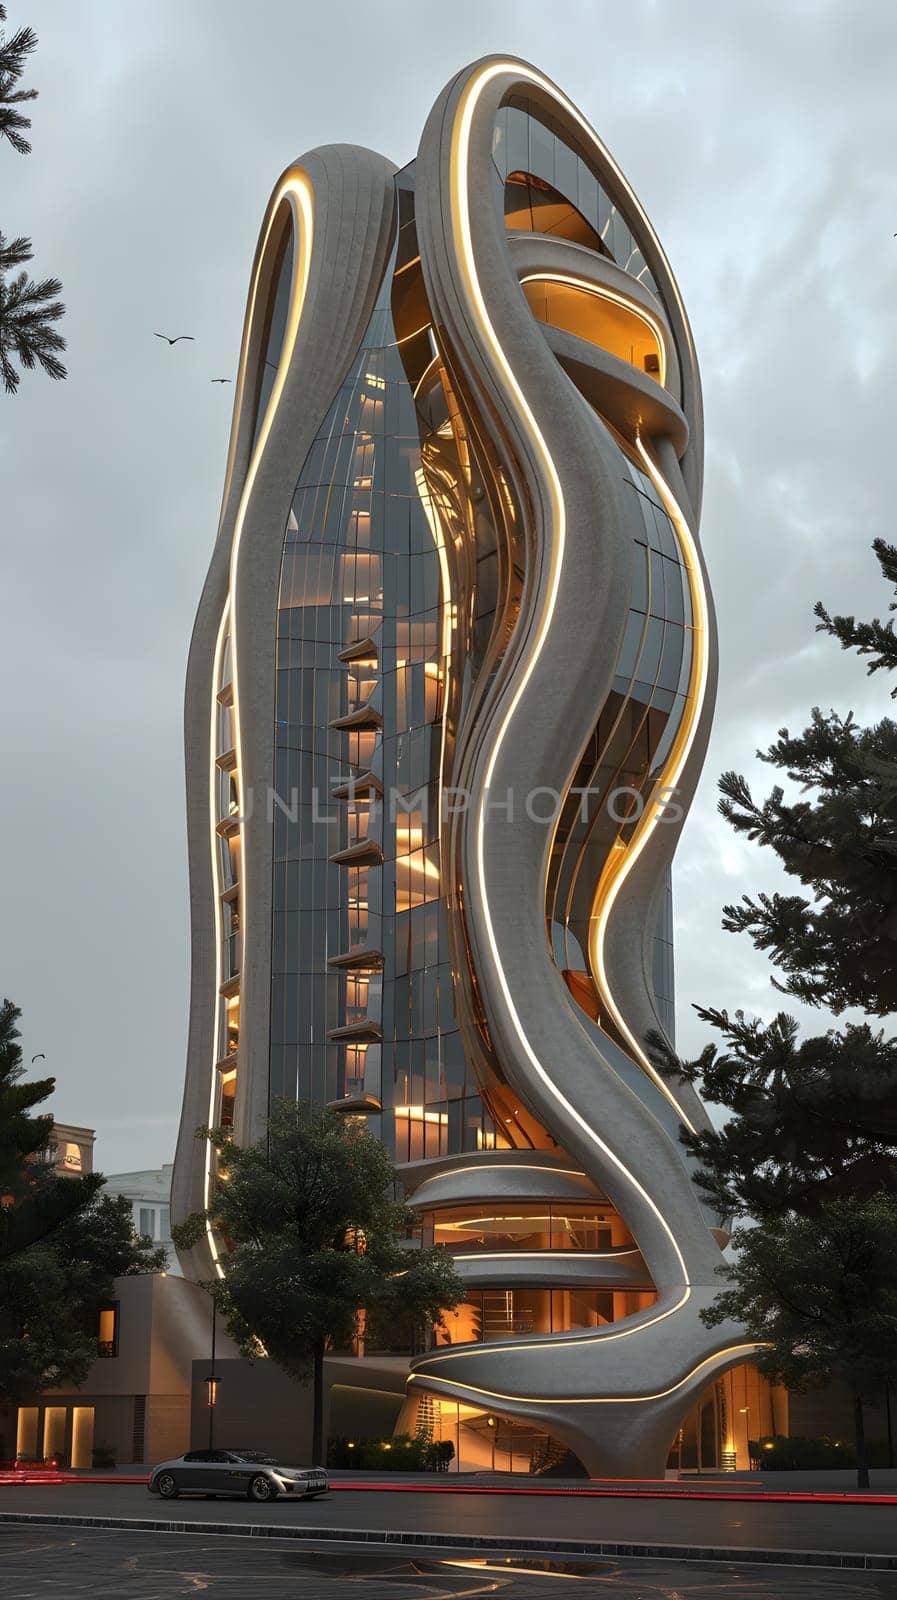 A skyscraper with a spiral facade lights up the night sky, showcasing urban design and artistic flair in the city. Surrounding trees and clouds complement the buildings unique structure